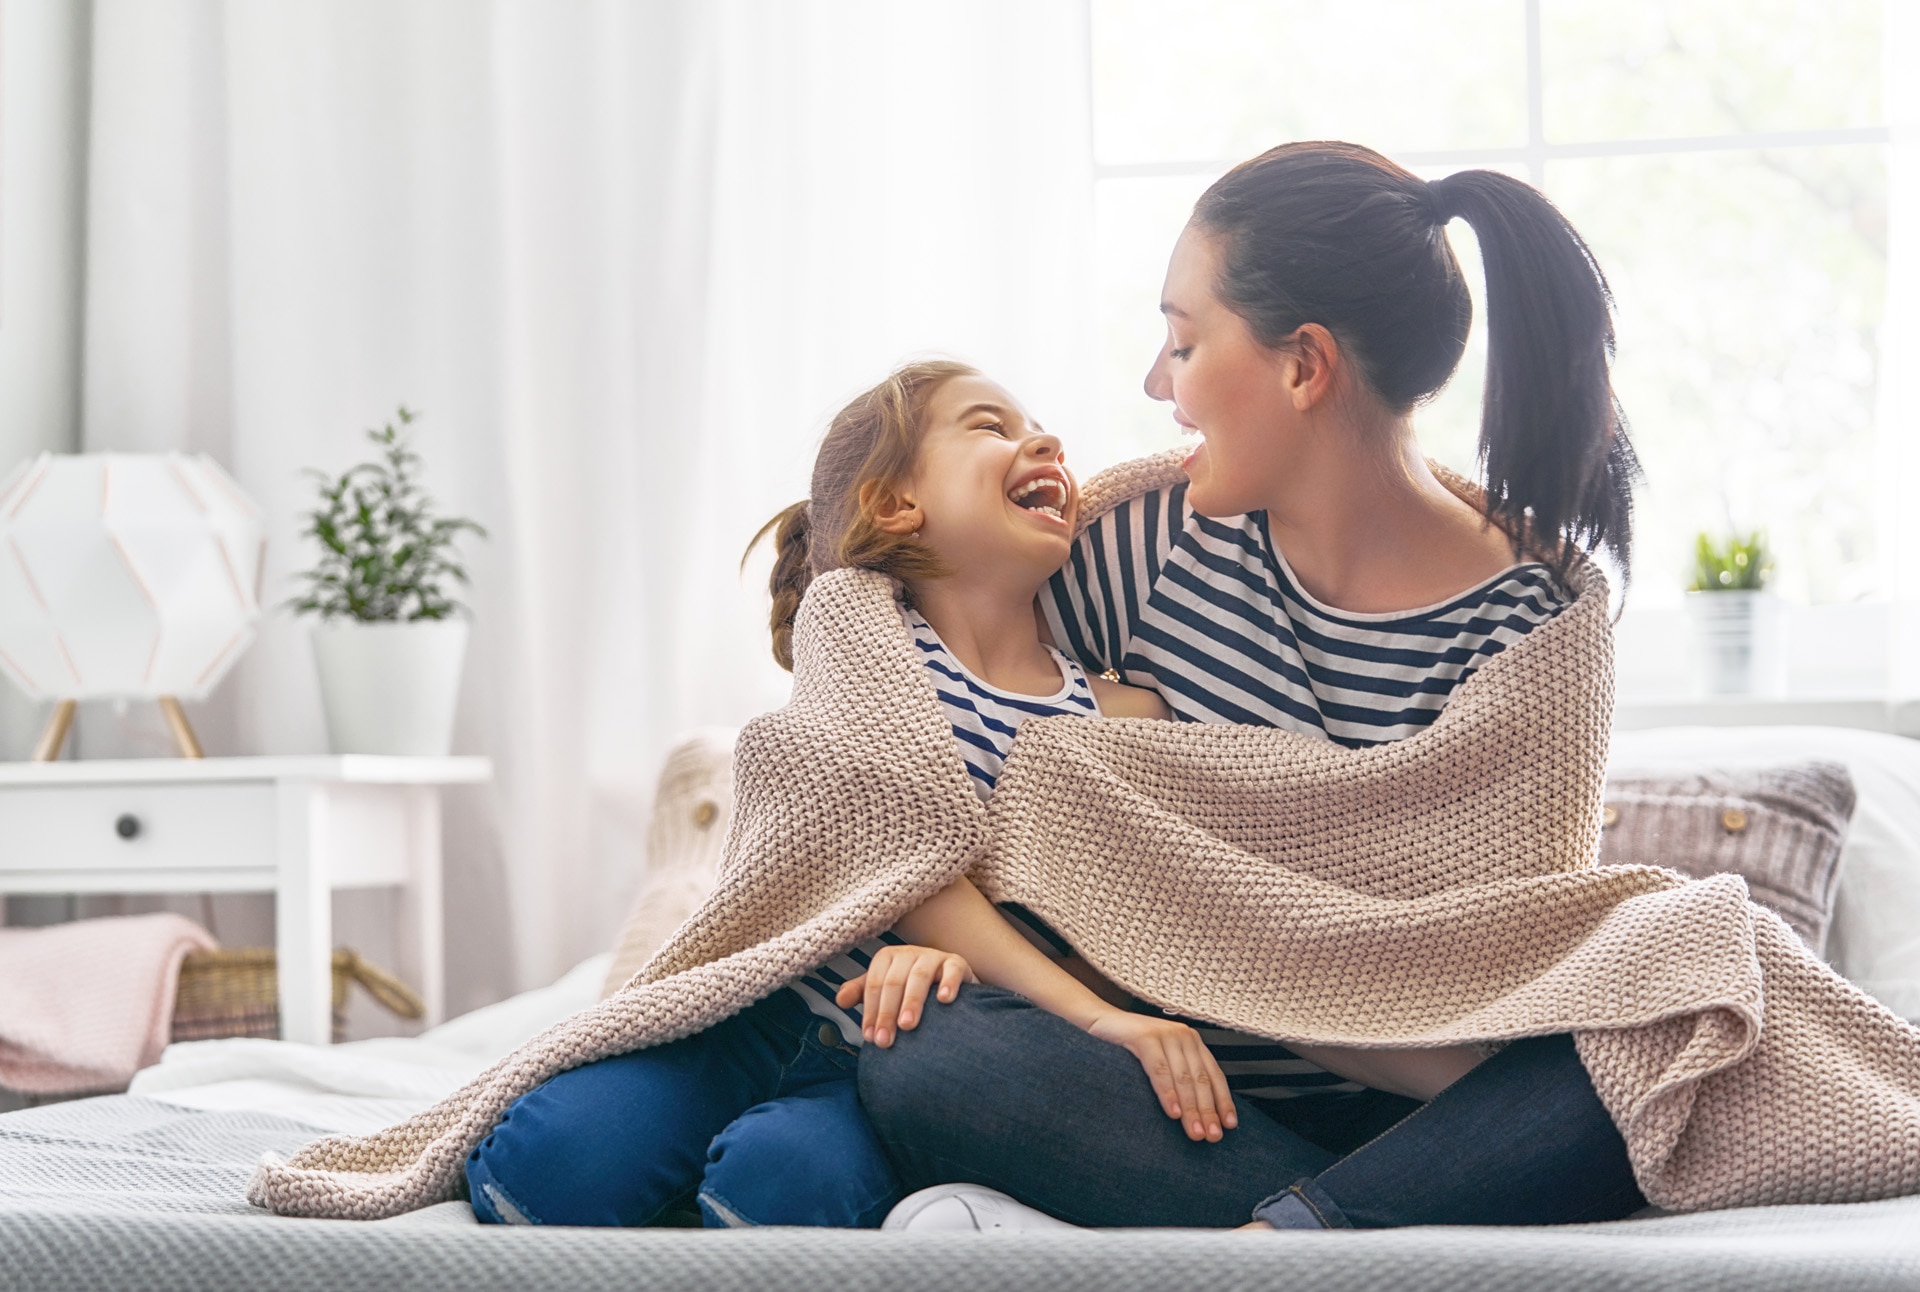 A nice girl and her mother enjoy sunny morning. Good time at home. Child wakes up from sleep. Family playing under blanket on the bed in the bedroom.; Shutterstock ID 1066576061; purchase_order: -; job: -; client: -; other: -